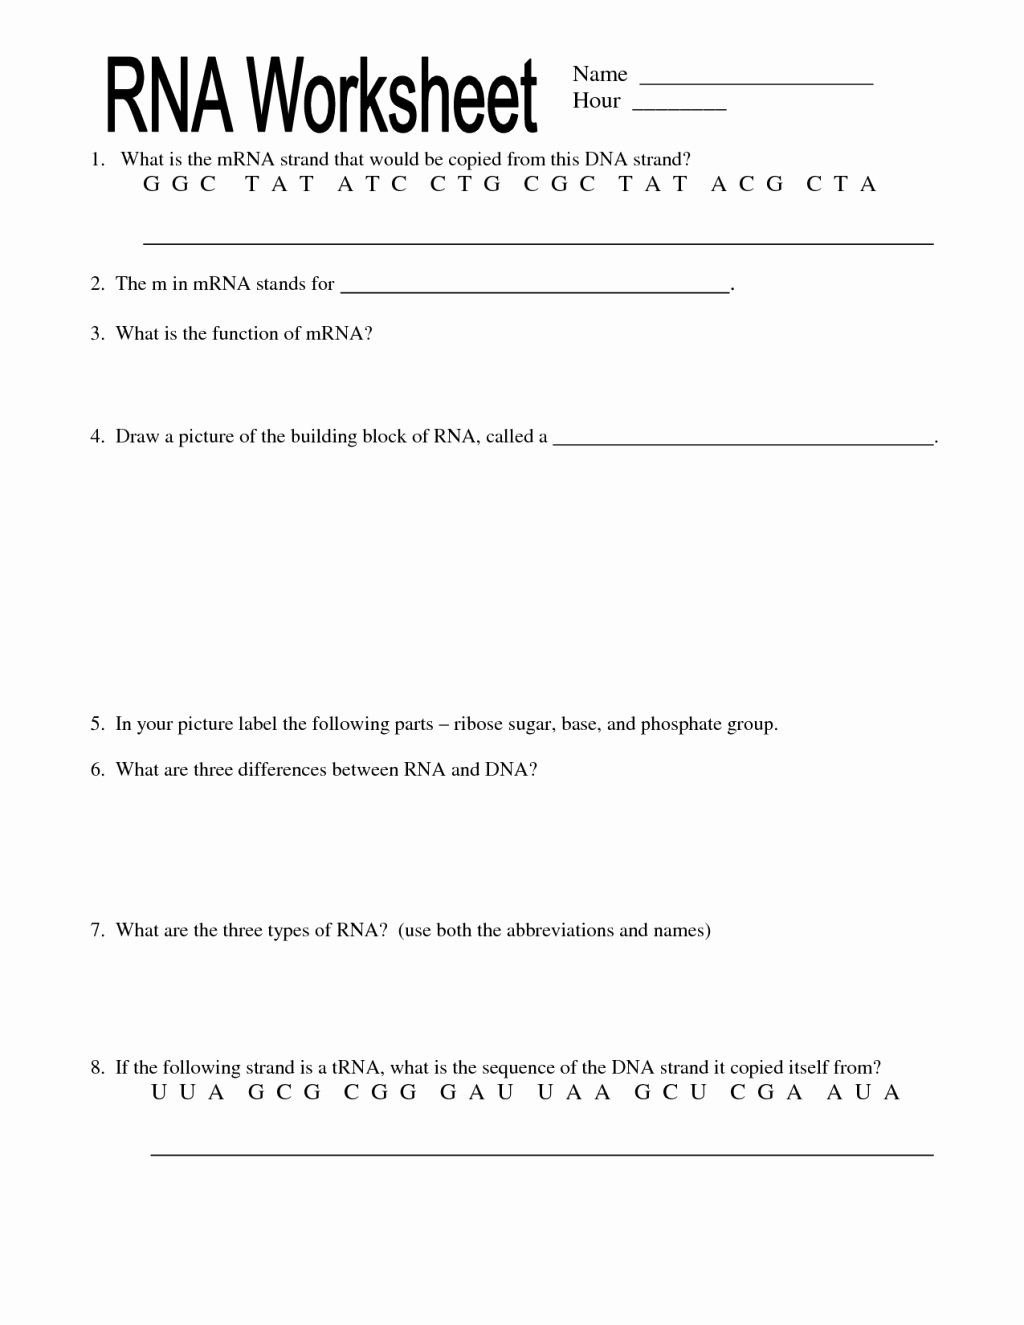 Dna and Rna Worksheet Answers 50 Dna and Rna Worksheet Answers In 2020